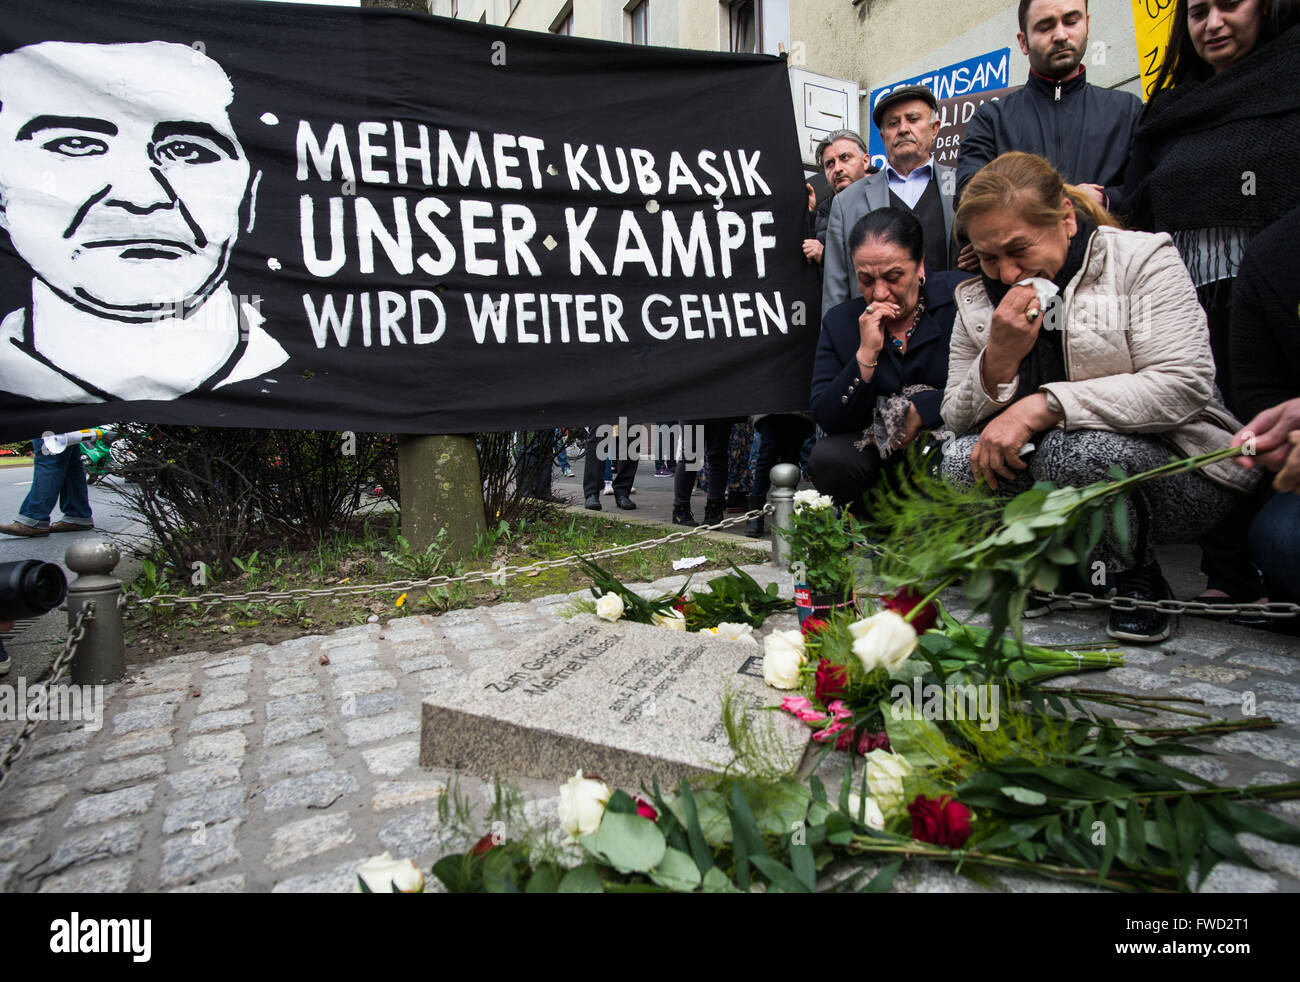 Dortmund, Germany. 4th Apr, 2016. The widow Elif Kubasik (l) as well as family members and representatives of the city of Dortmund commemorate the cinema owner Mehmet Kubasik, murdered by the NSU terror group, in Dortmund, Germany, 4 April 2016. 10 years ago, Kubasik became the eighth victim of the Neonazi terror group. PHOTO: BERND THISSEN/dpa/Alamy Live News Stock Photo